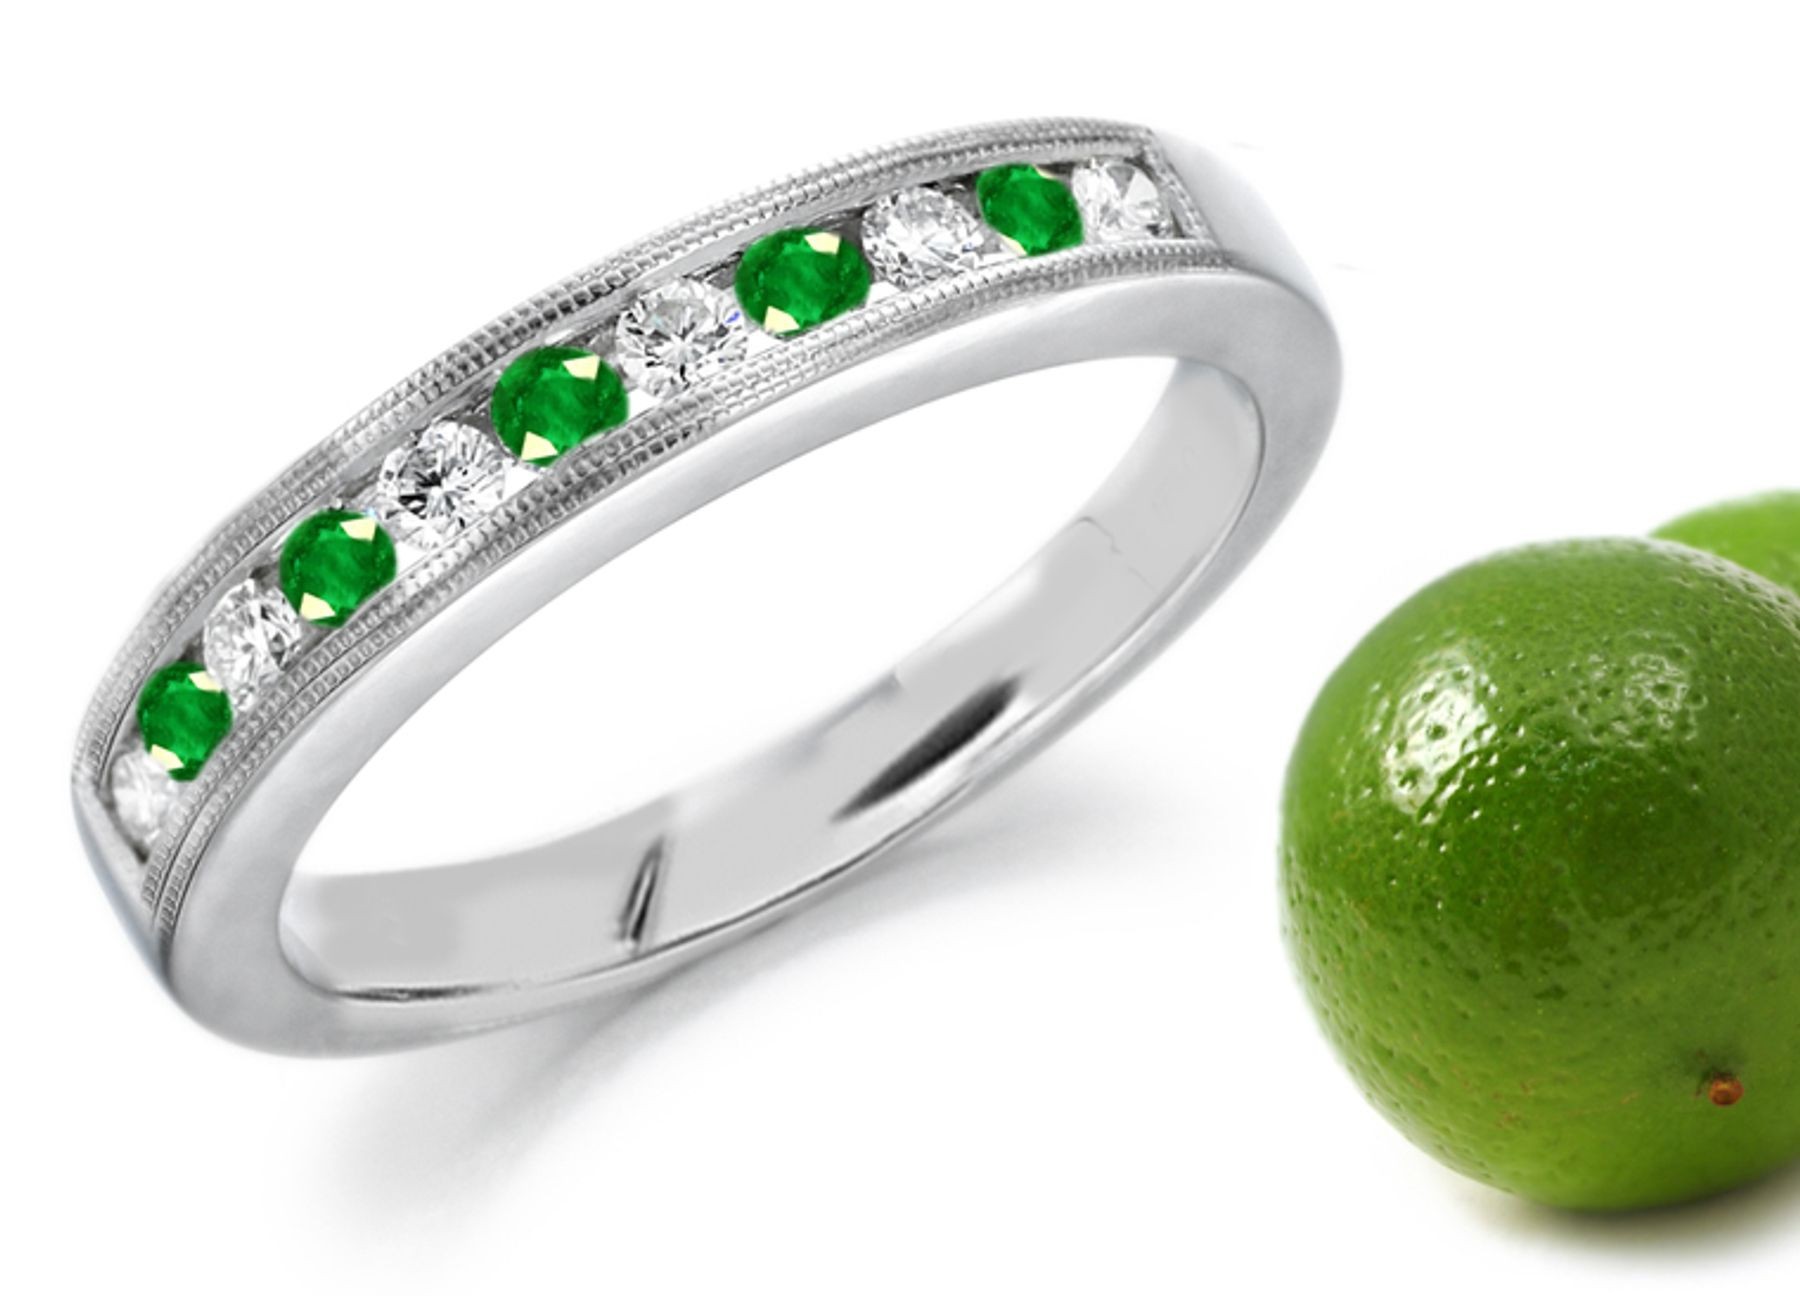 Special Effects: 13 Stone Emerald & Diamond Wedding Gold Band